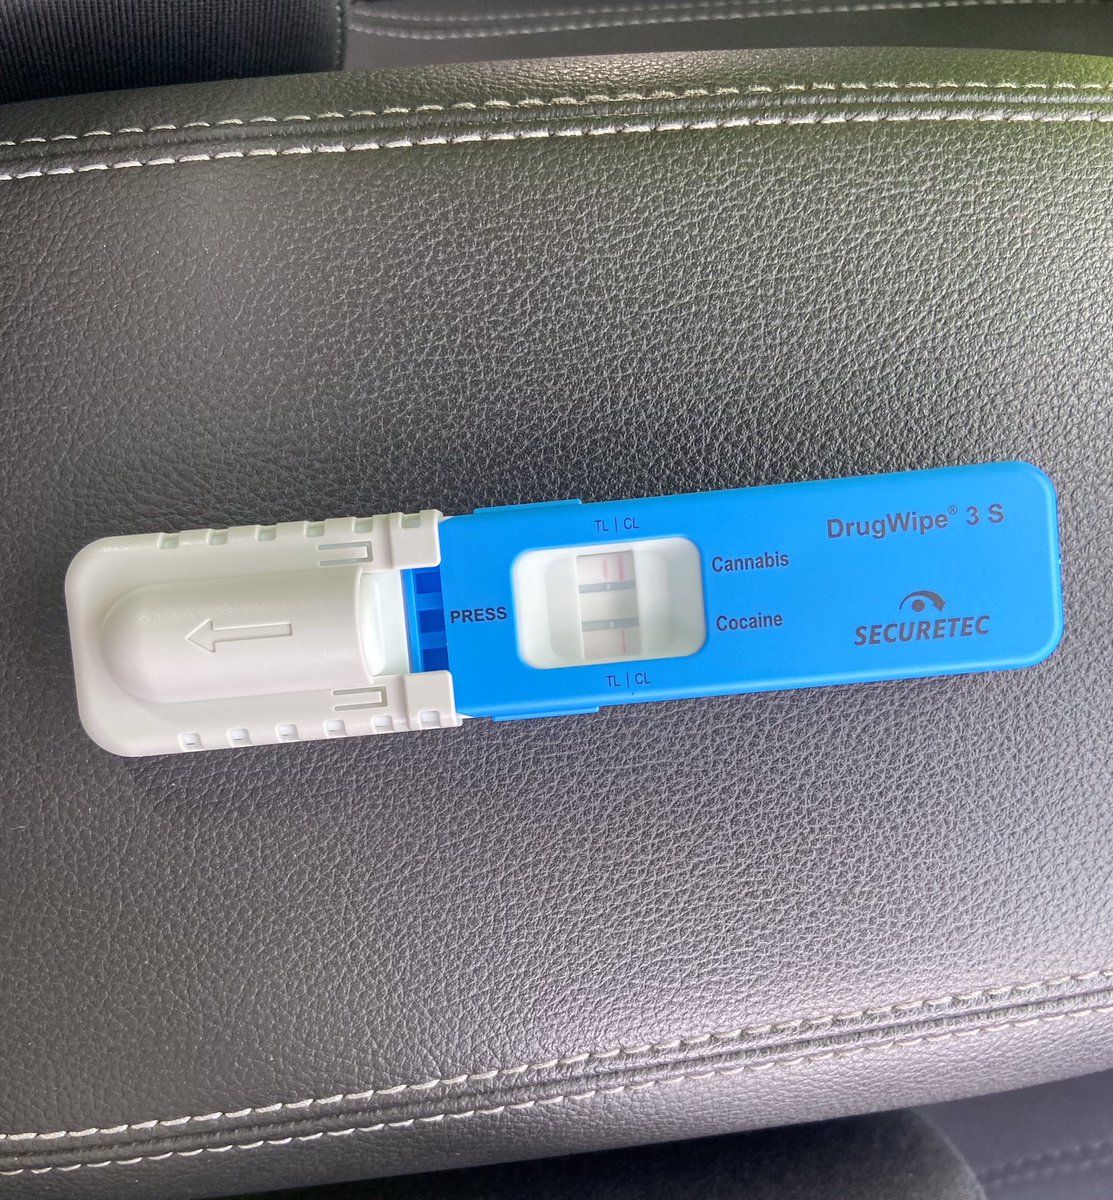 #SRSU #RoadSafety team out yesterday, 5mins from finish, driver stopped in #Devizes for level of #Tints (30%) Windows down revealed a lot more! 😵‍💫 #arrested #drugdrive for providing a positive roadside test for #Cannabis #failed to provide bloods #charged #fatal5 #LateNight